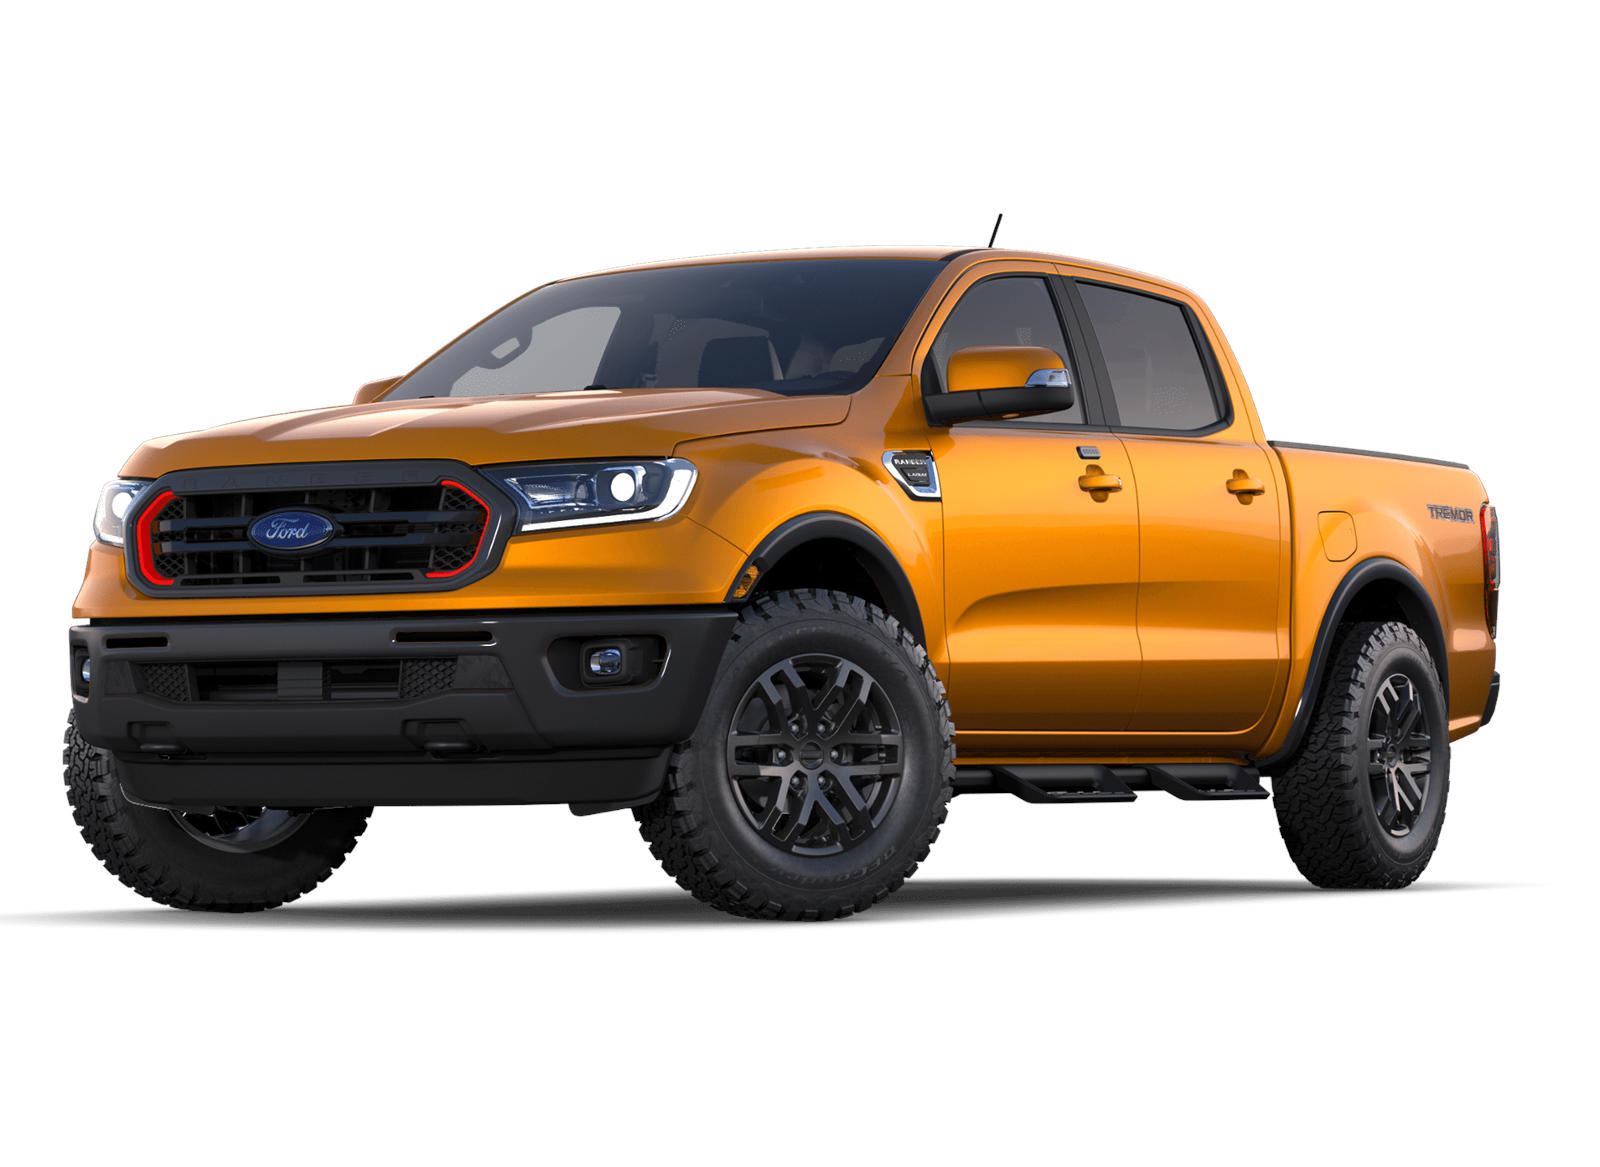 Fully Loaded 2021 Ford Ranger Tremor Costs Over $50,000 | CarBuzz